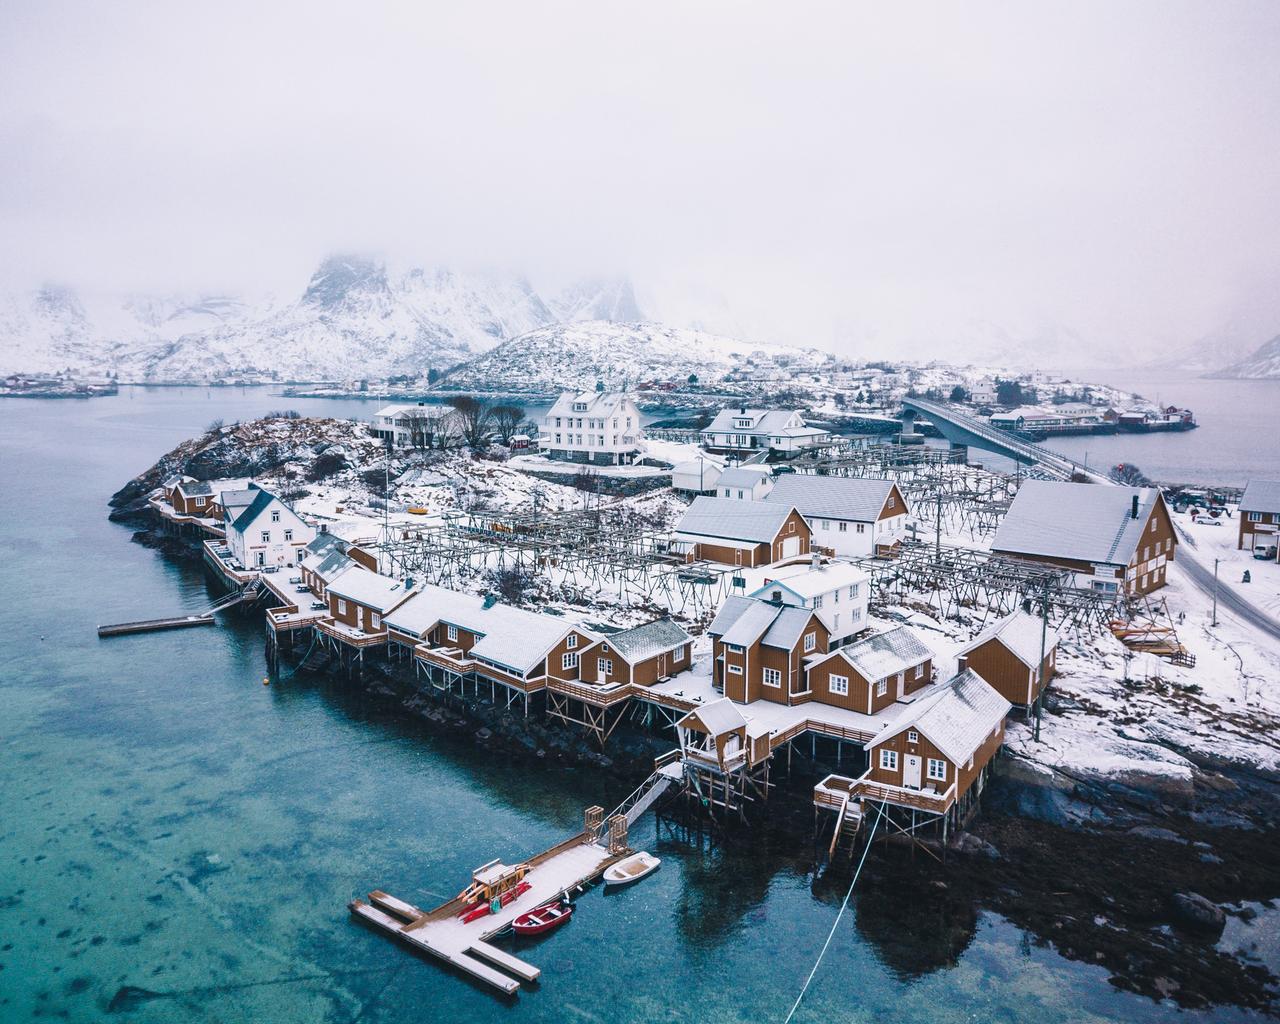 A small coastal town in the snowy winter season with foggy mountains in the background.